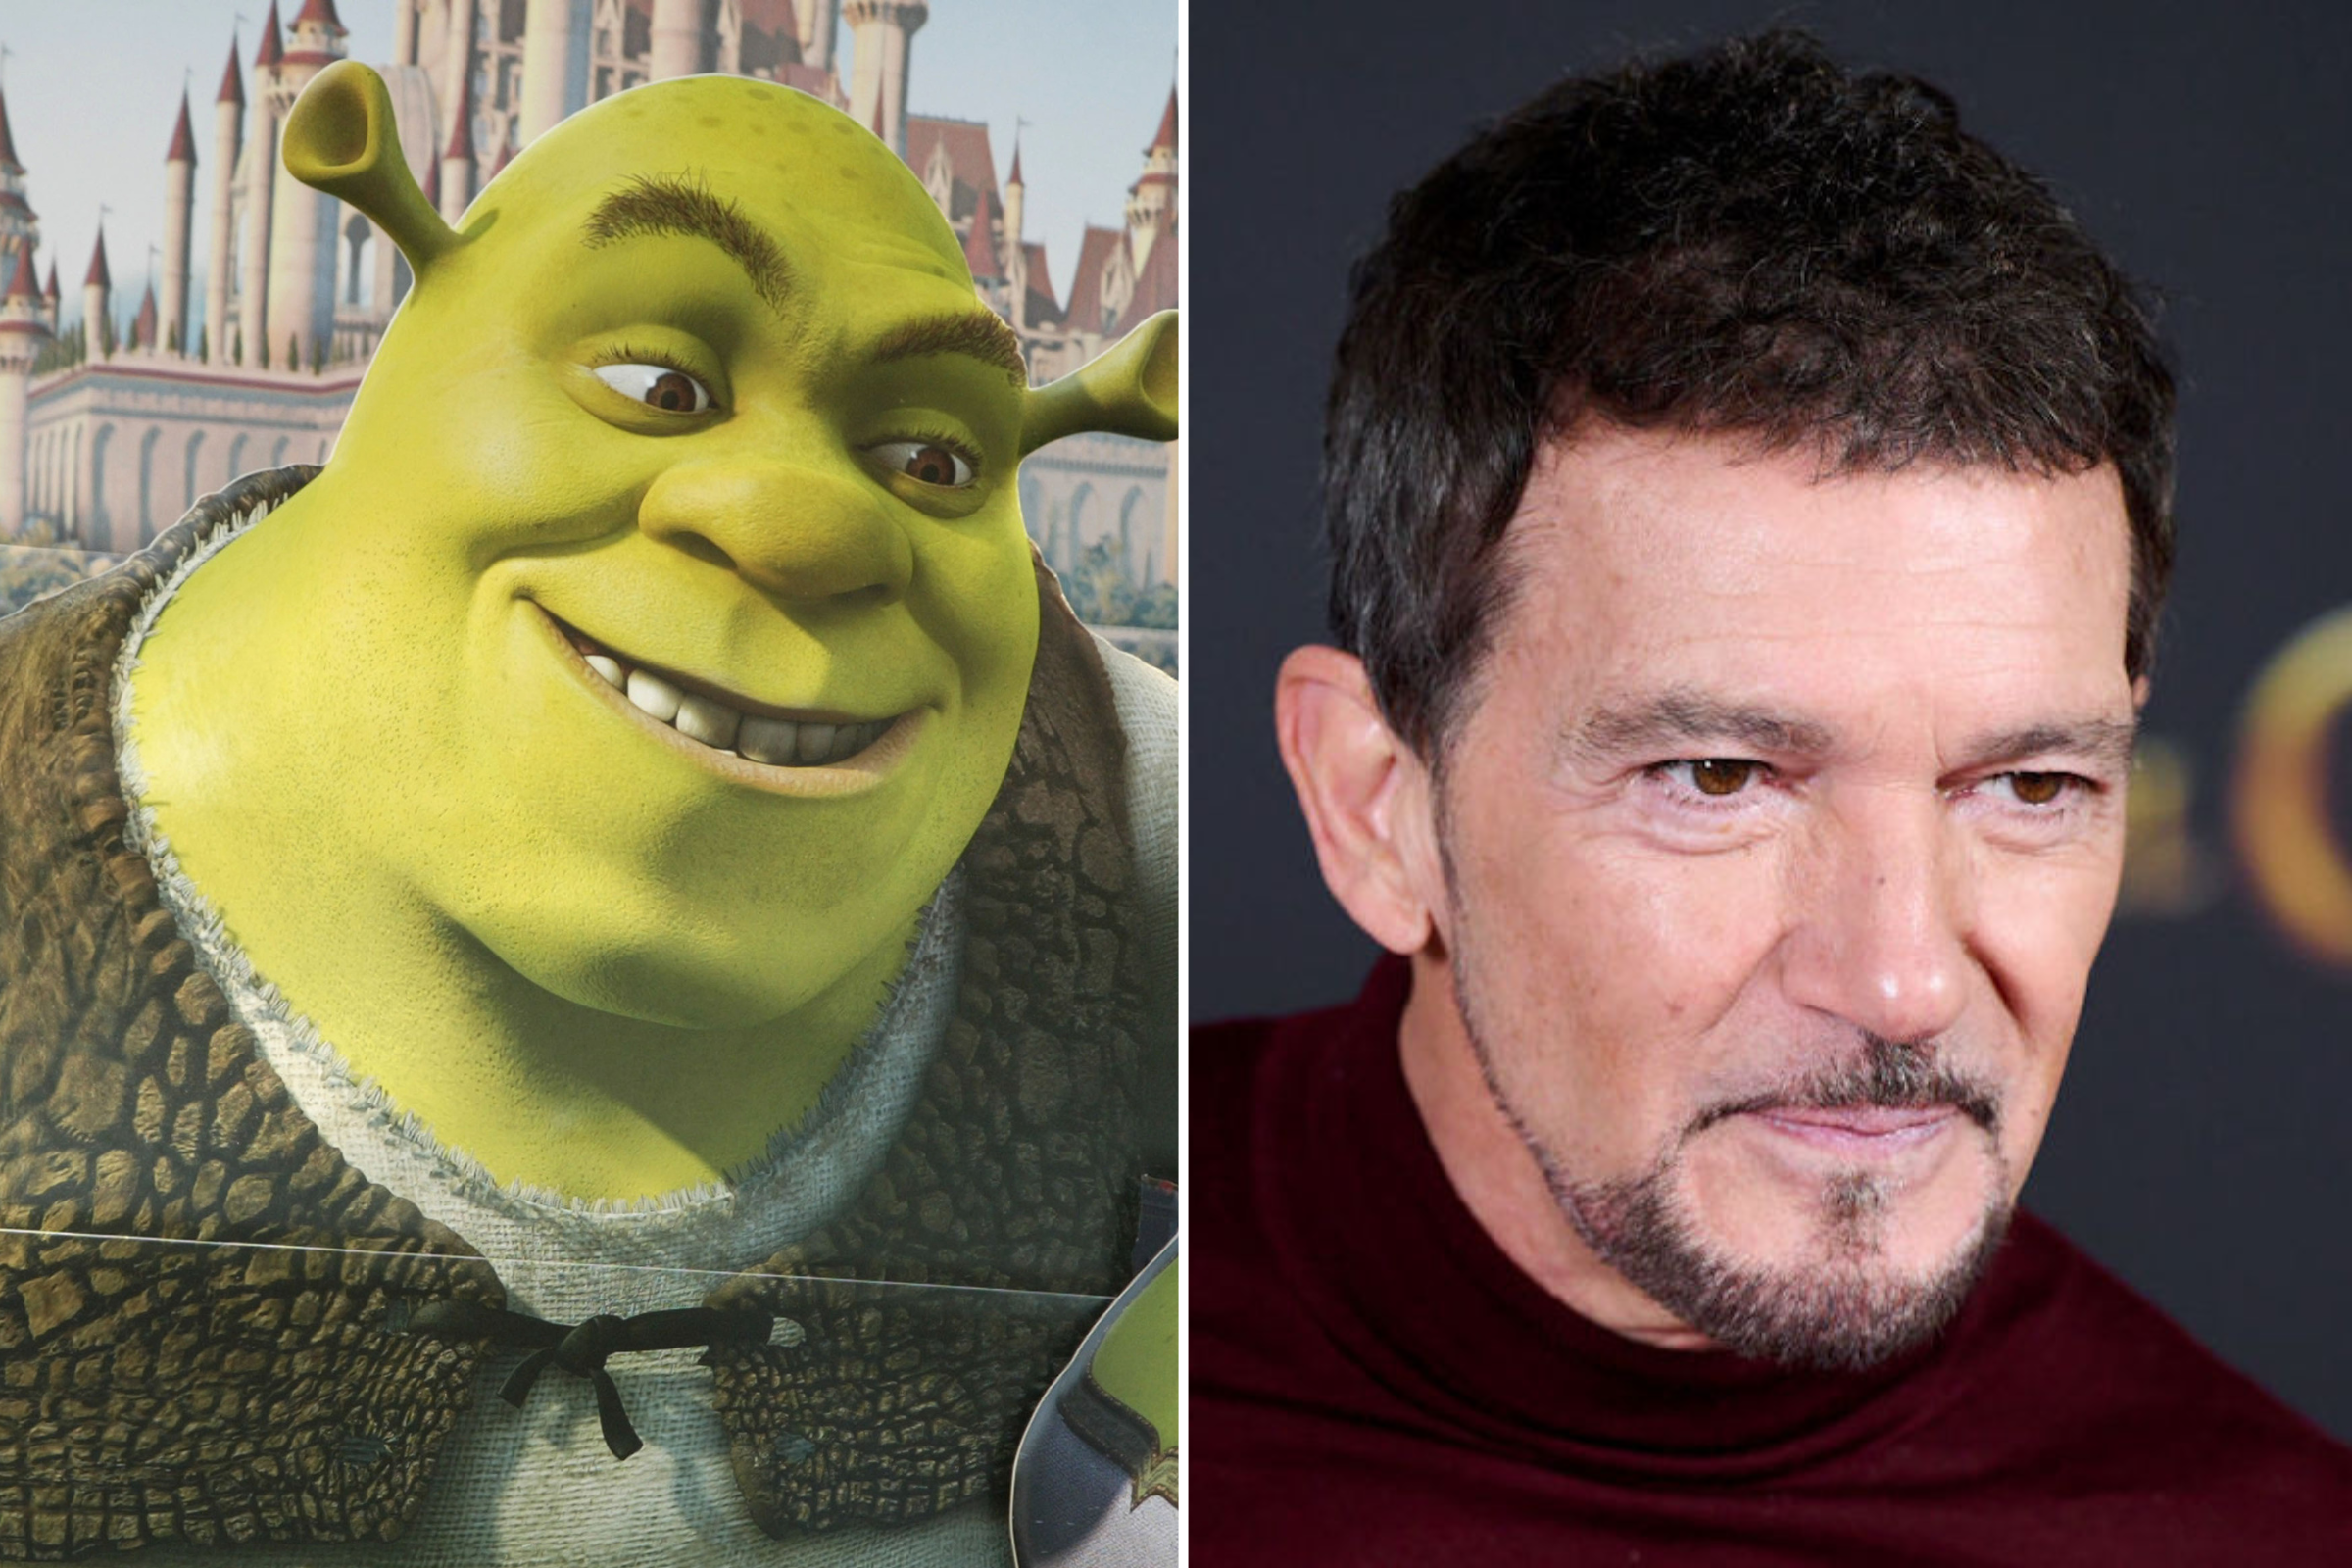 Shrek 5, Release date speculation, cast and latest news.